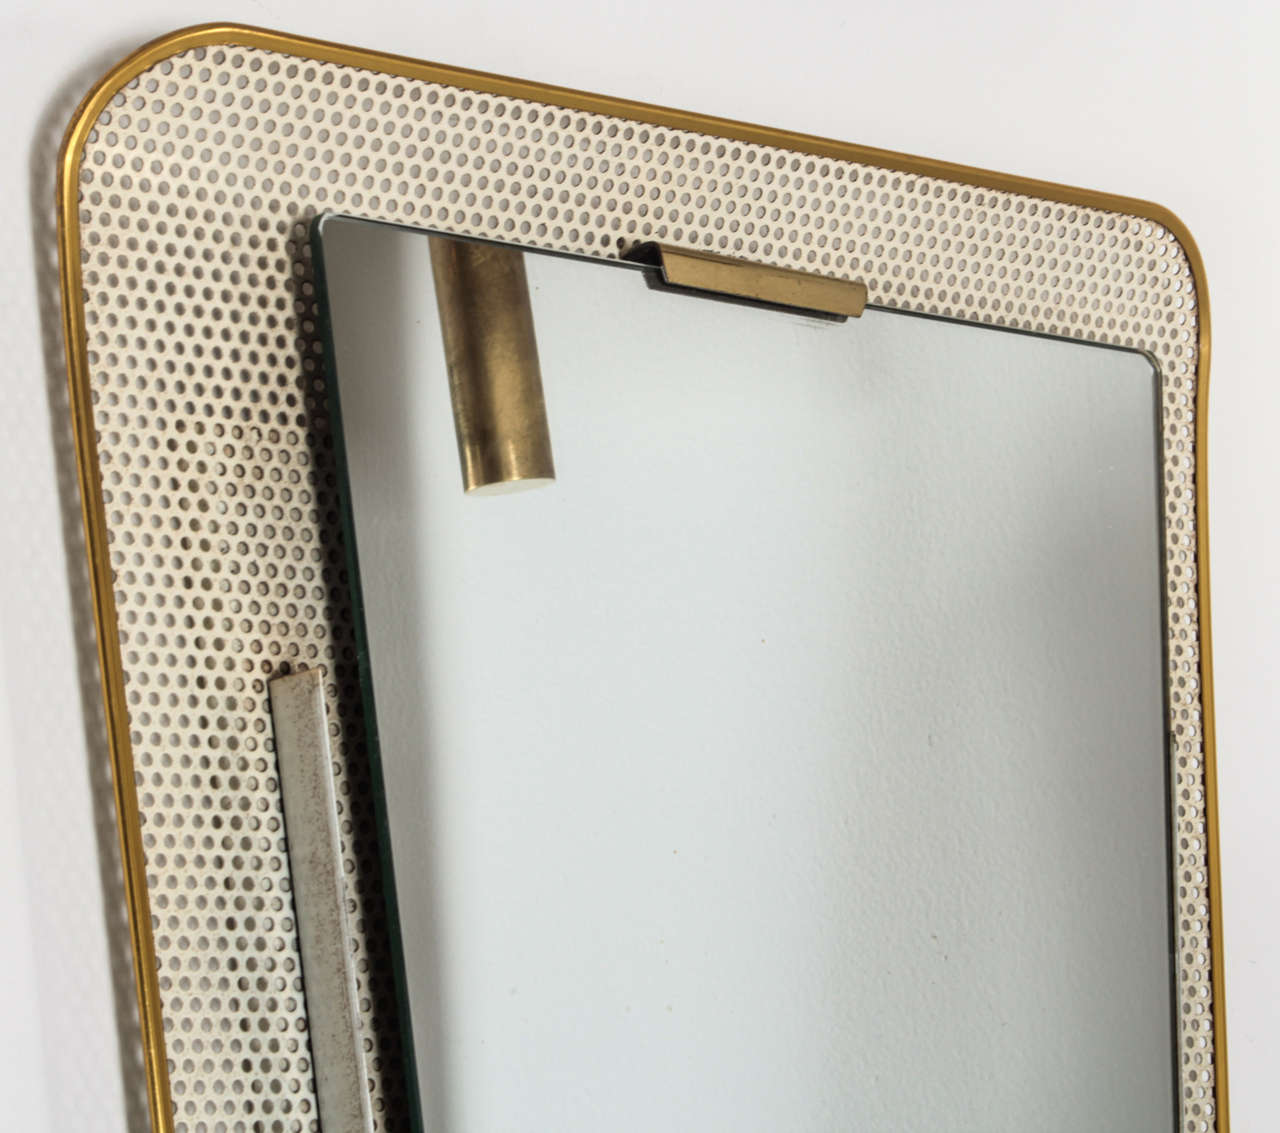 German 1950s French Mategot-style Perforated Metal Mirror by Paul Klose